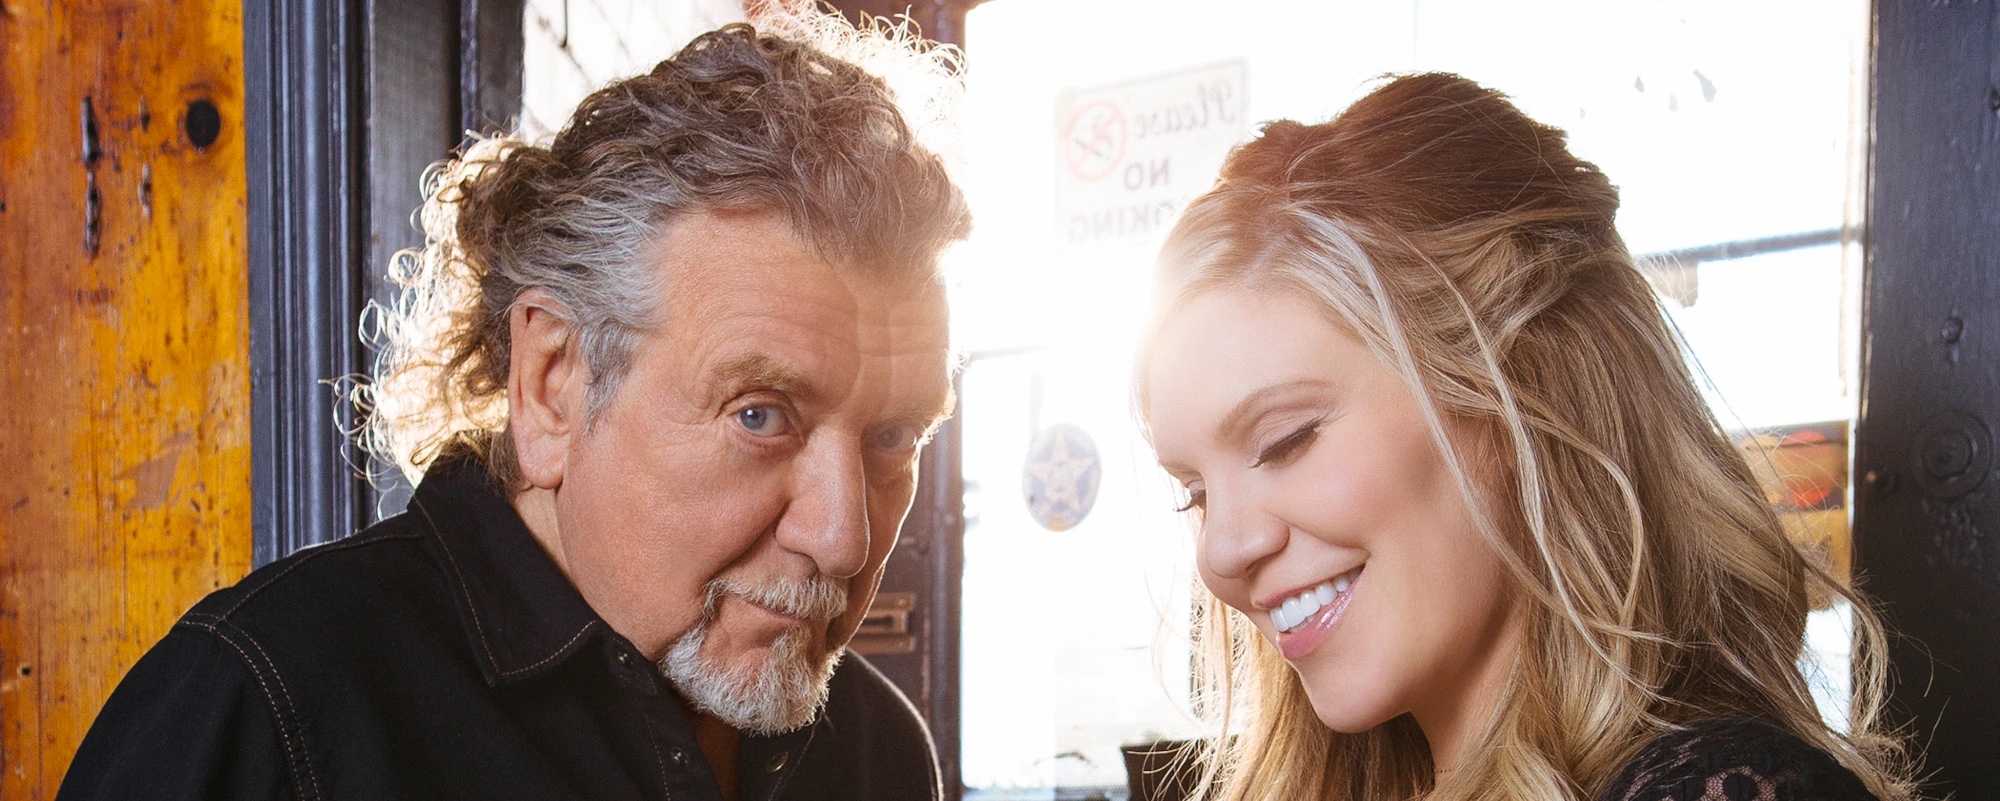 Robert Plant and Alison Krauss Add New September Dates to Their 2022 Tour